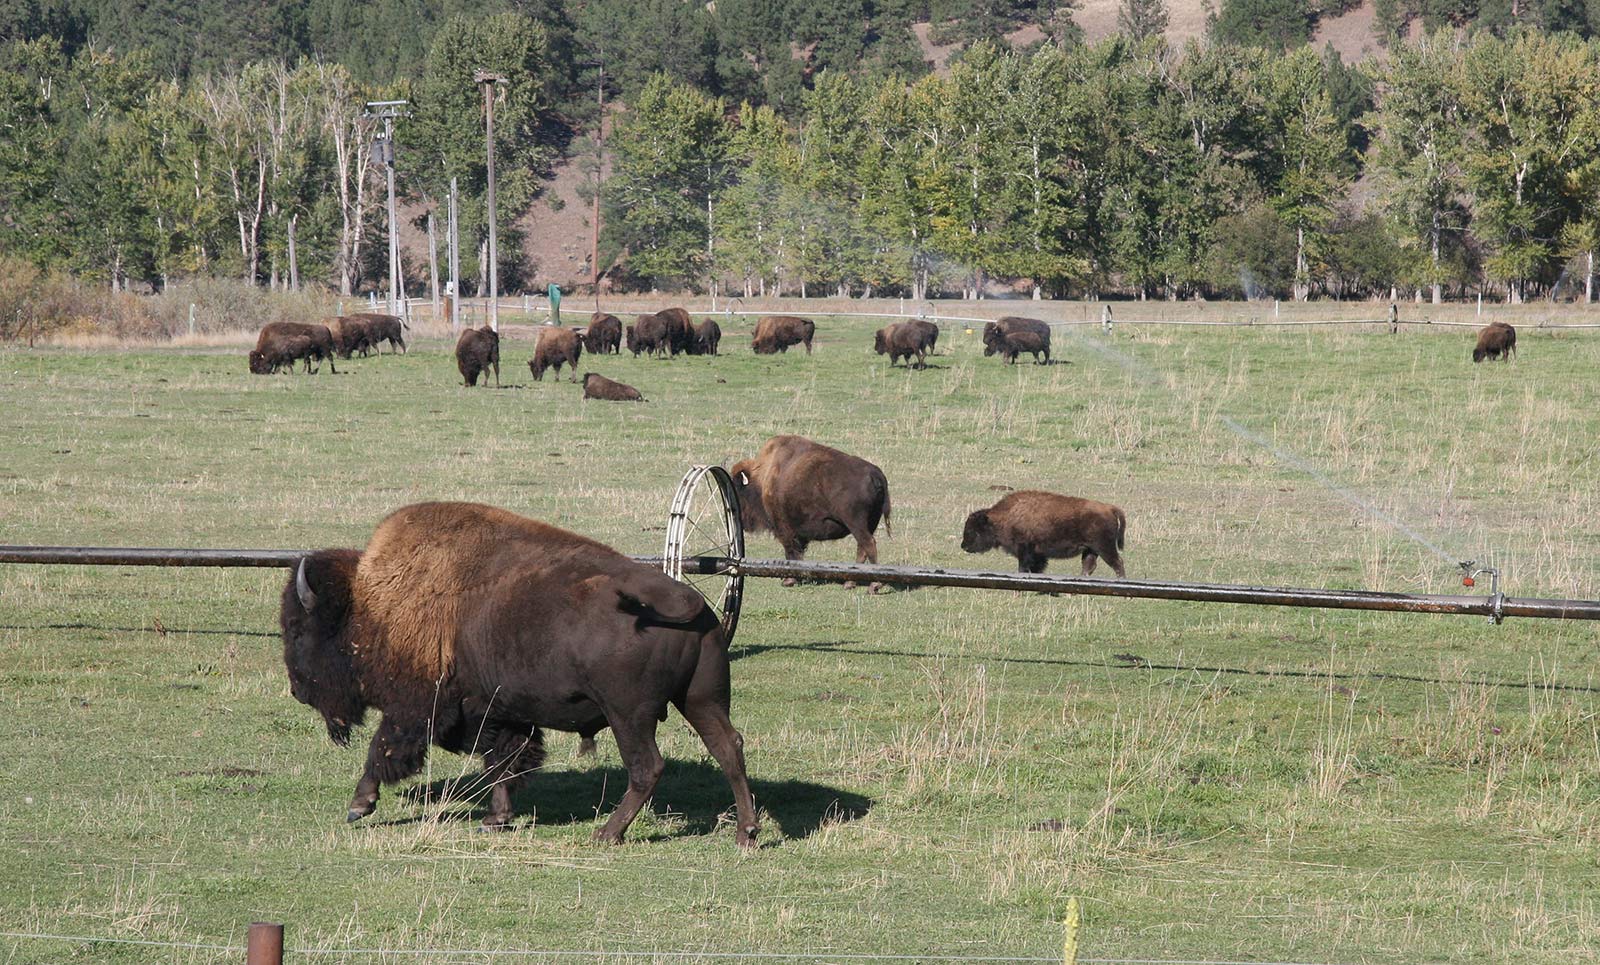 Bison can be spotted on the Bitterroot Trail